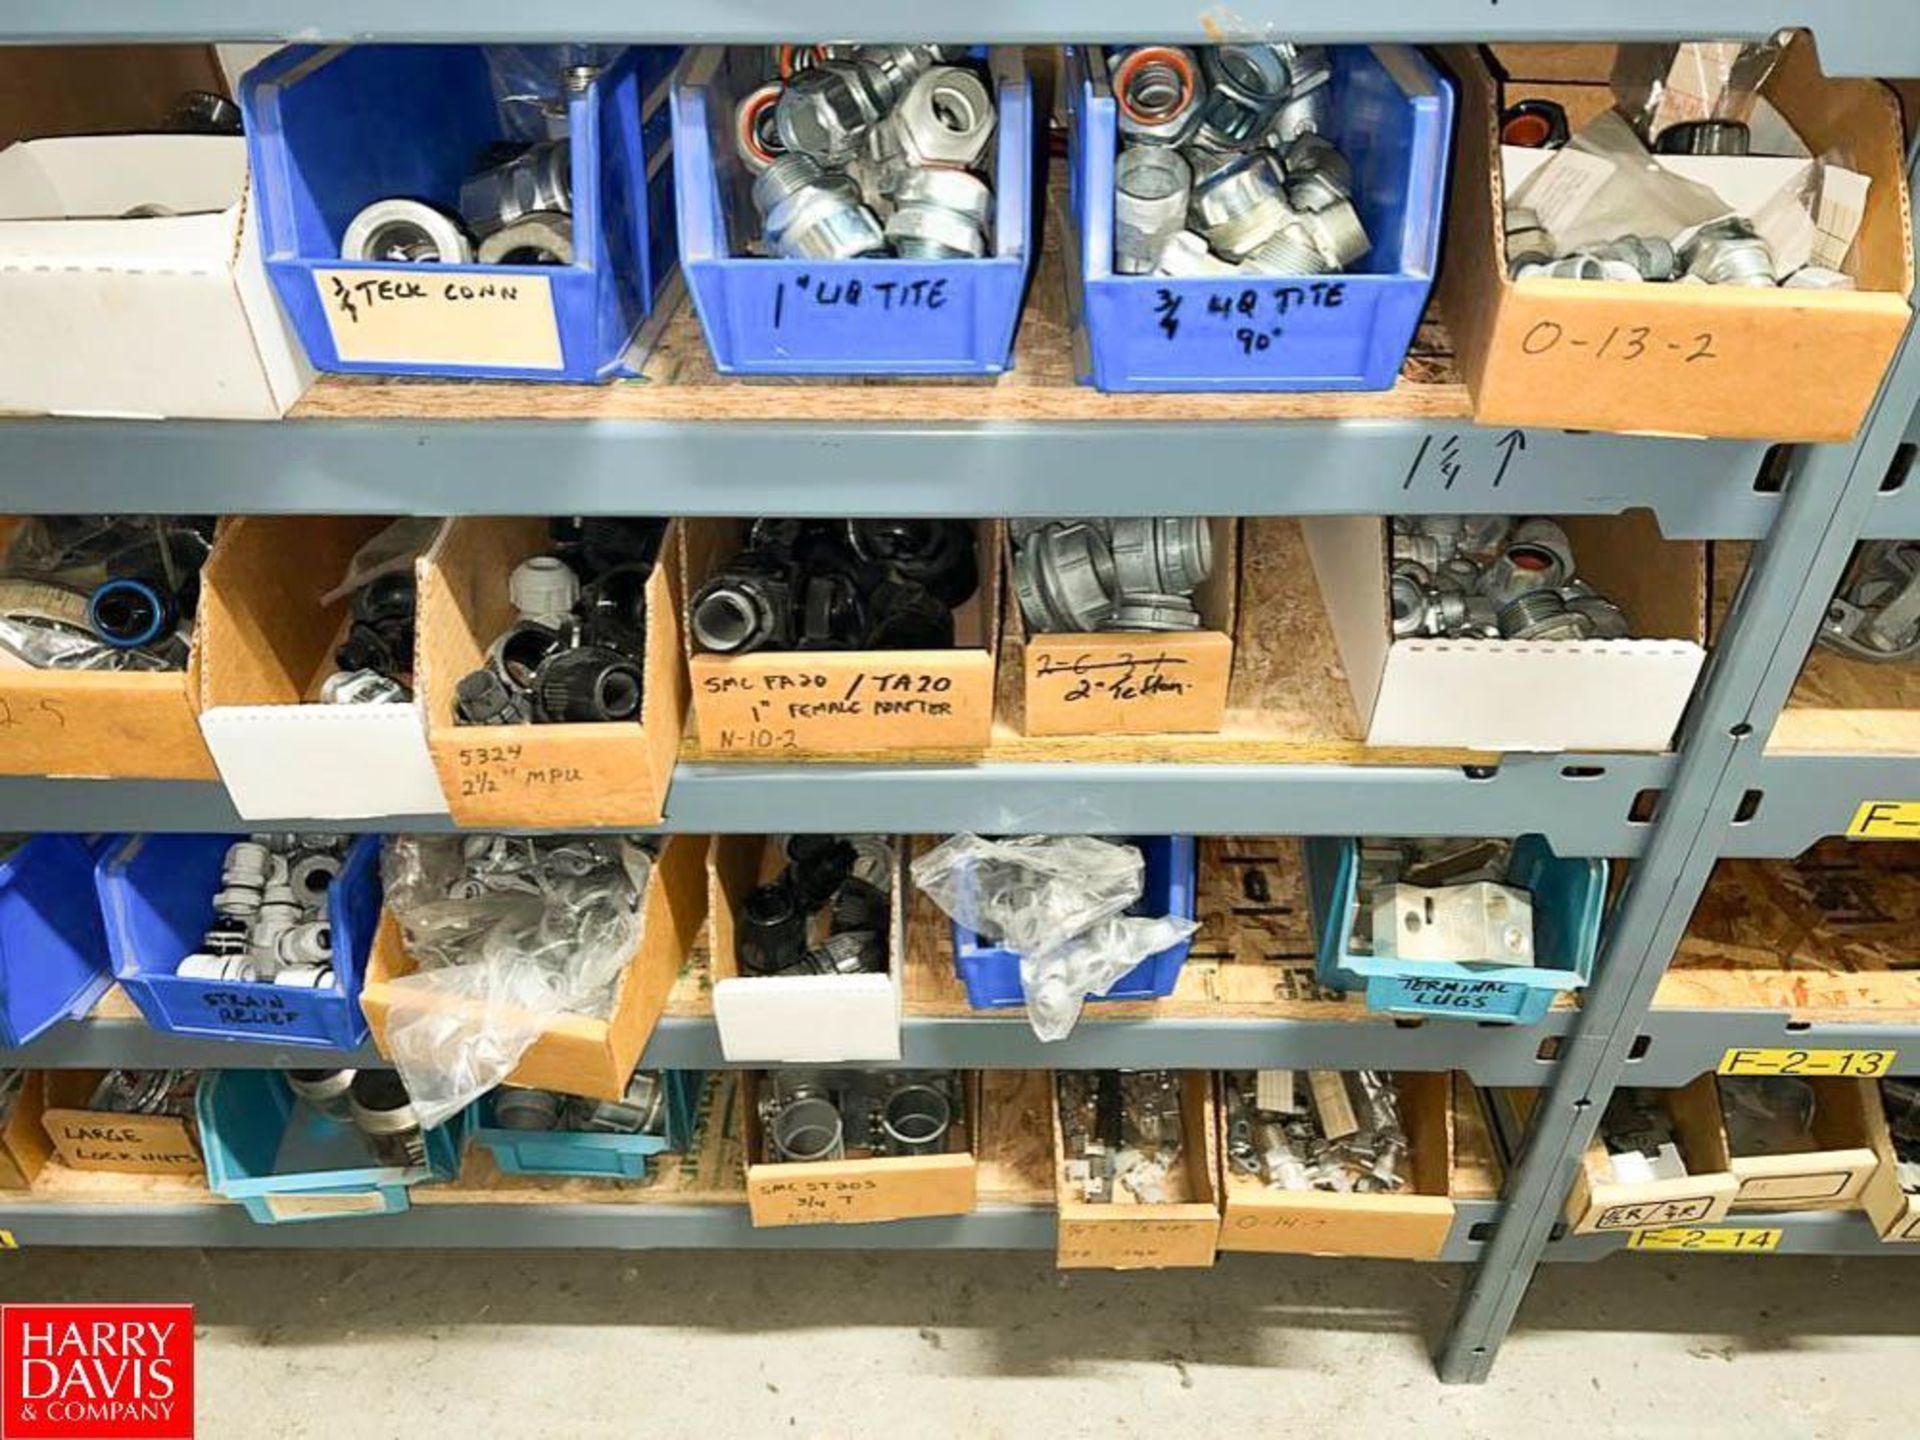 Assorted Electrical Equipment, Including: Circuit Breakers, Conduit, Conduit Adapters and Enclosures - Image 34 of 46